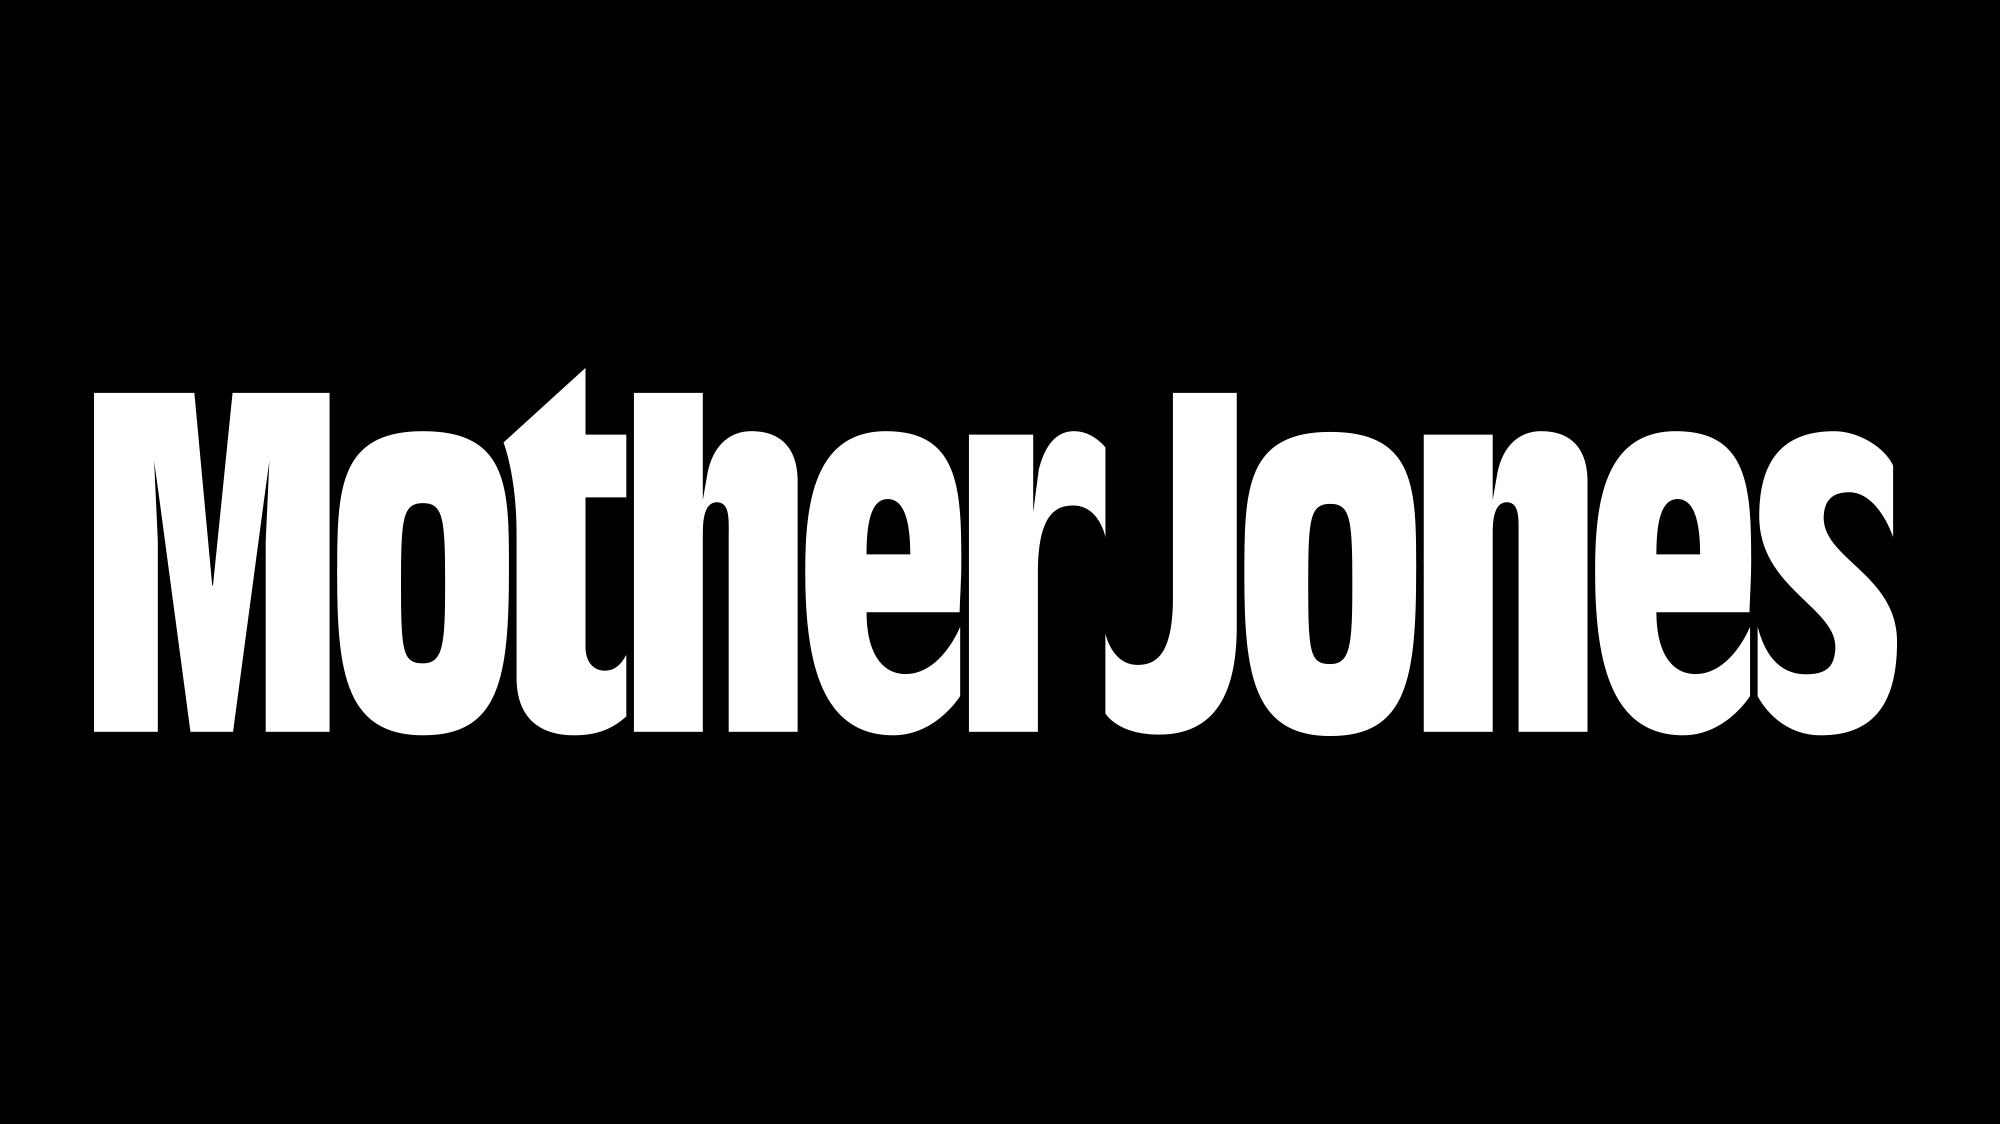 Is Mother Jones part of the deep state swamp? Top reporter David Corn linked to fake Trump dossier mud-slinging from “anonymous” sources